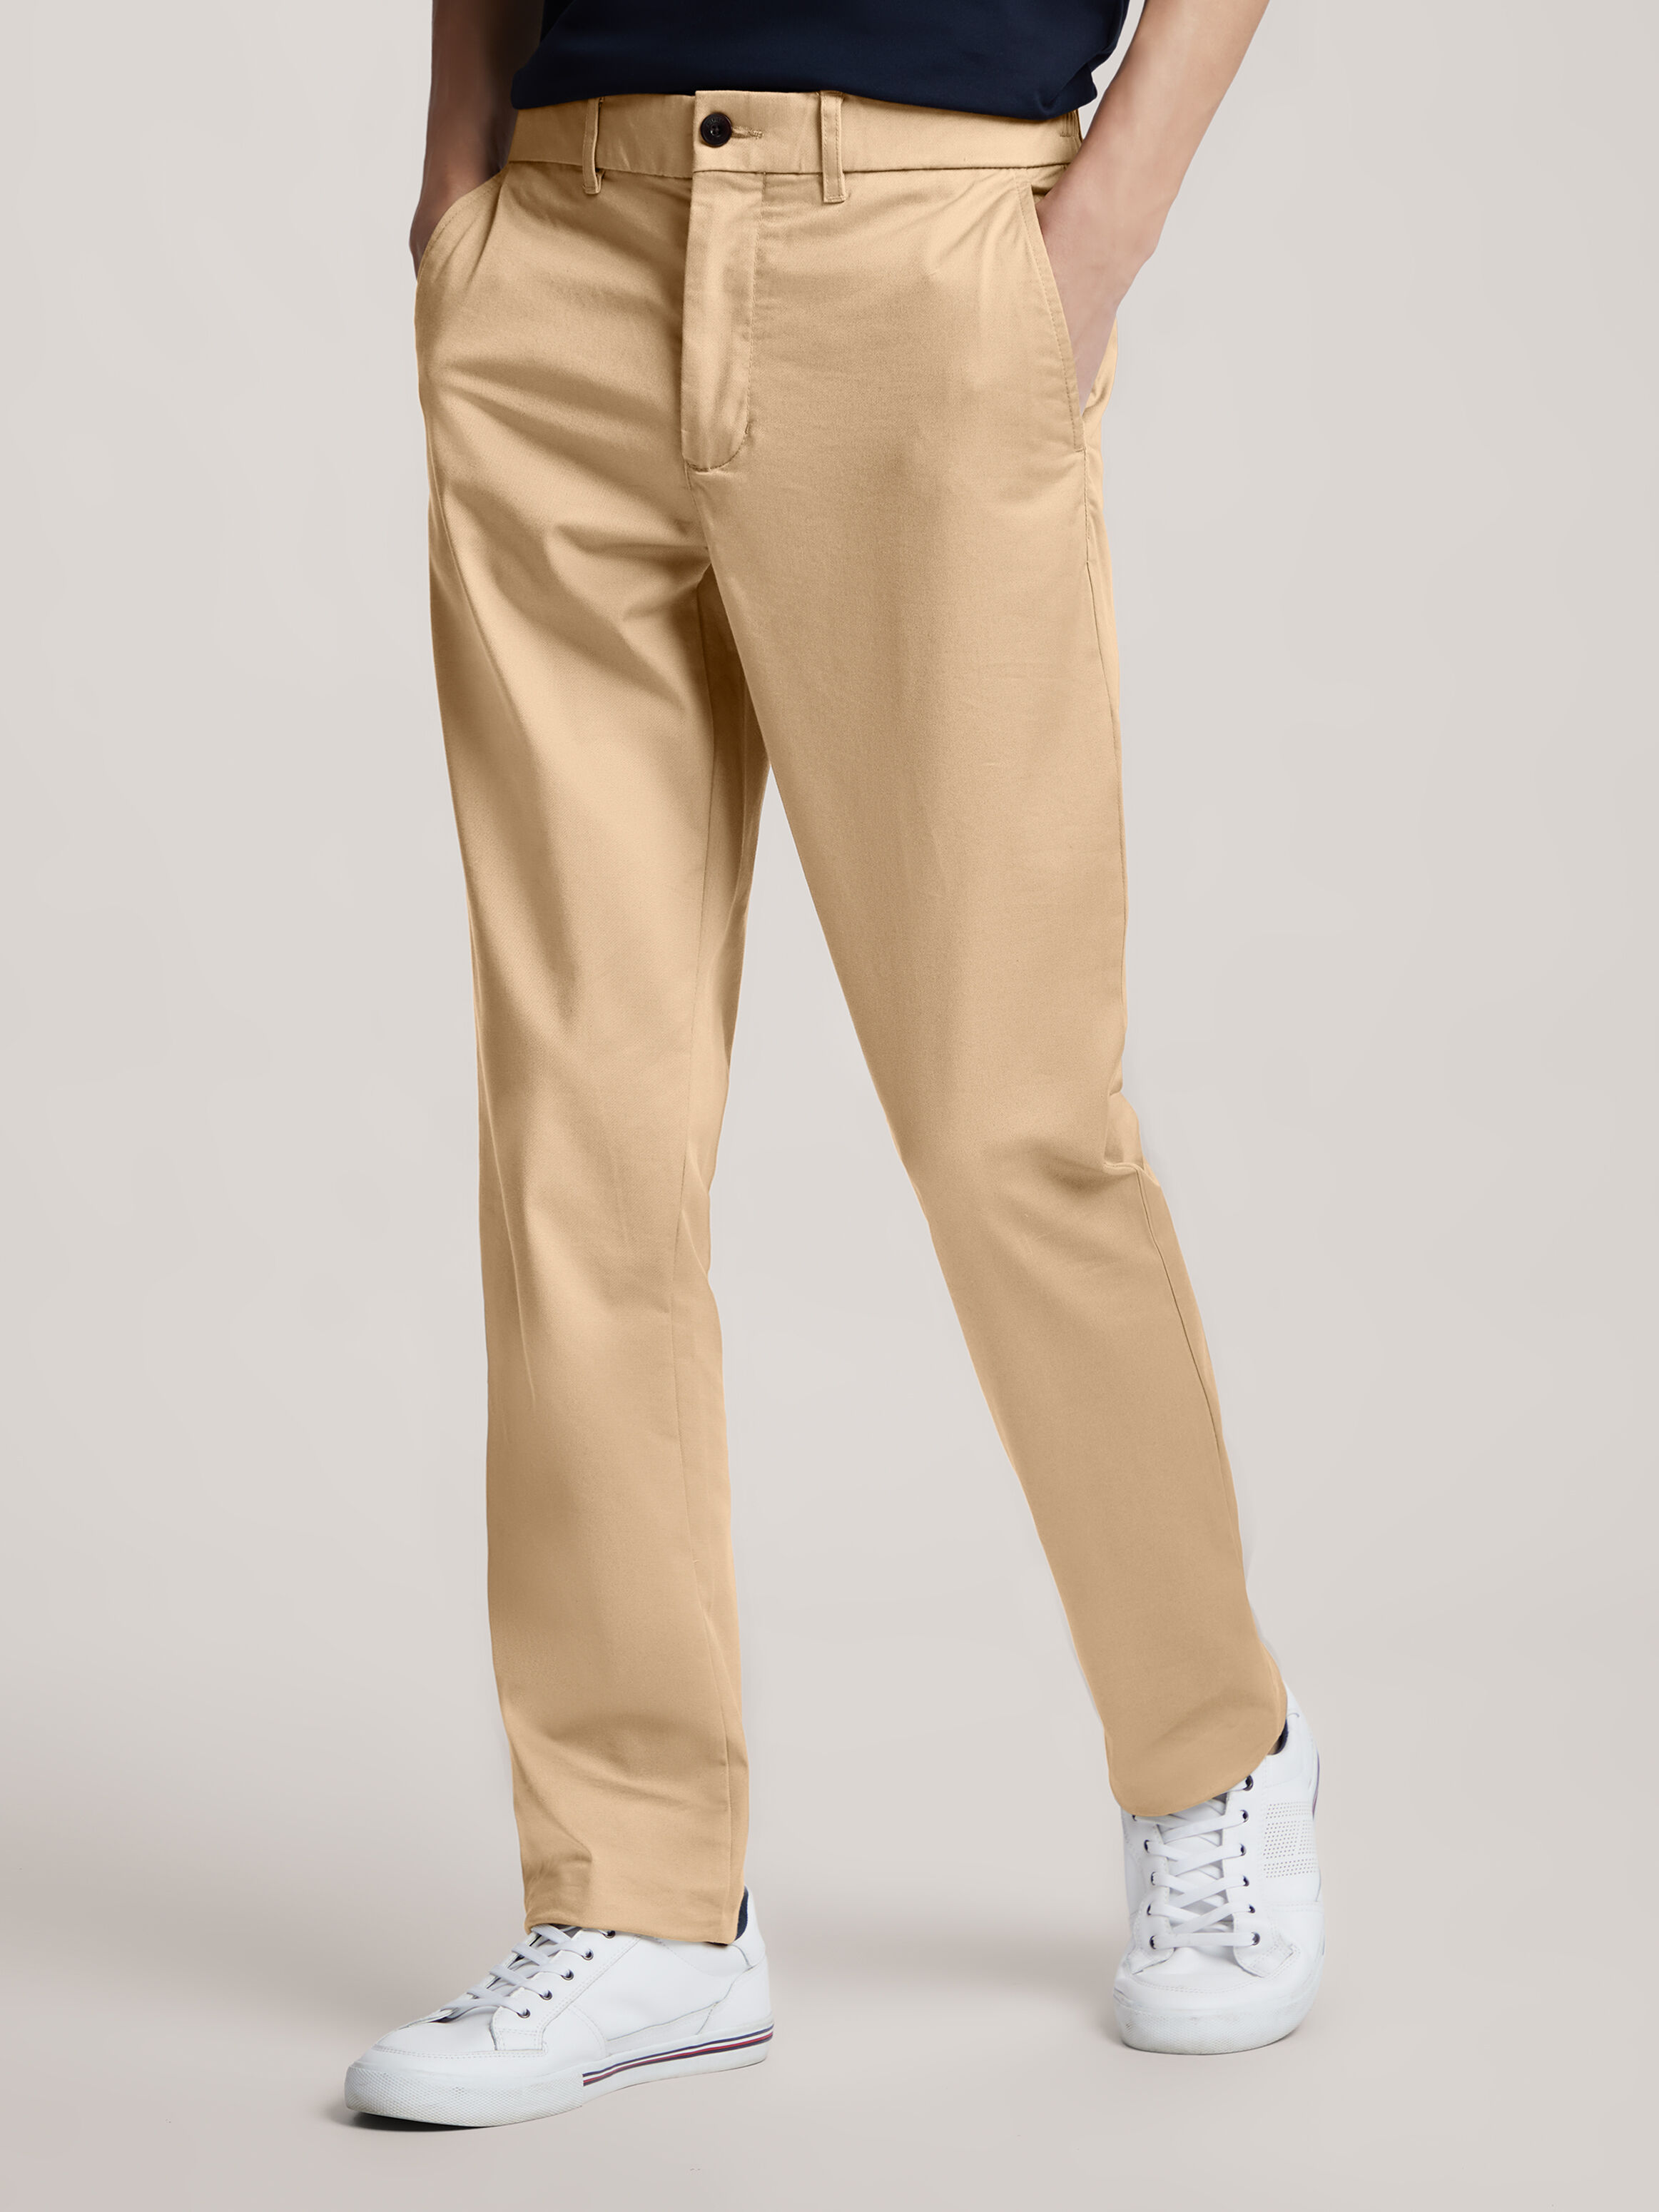 Chinos Ankle Blue Bond Formal Mens Cotton Pants, Size: 30/32/34/36/38 at Rs  400 in Bengaluru